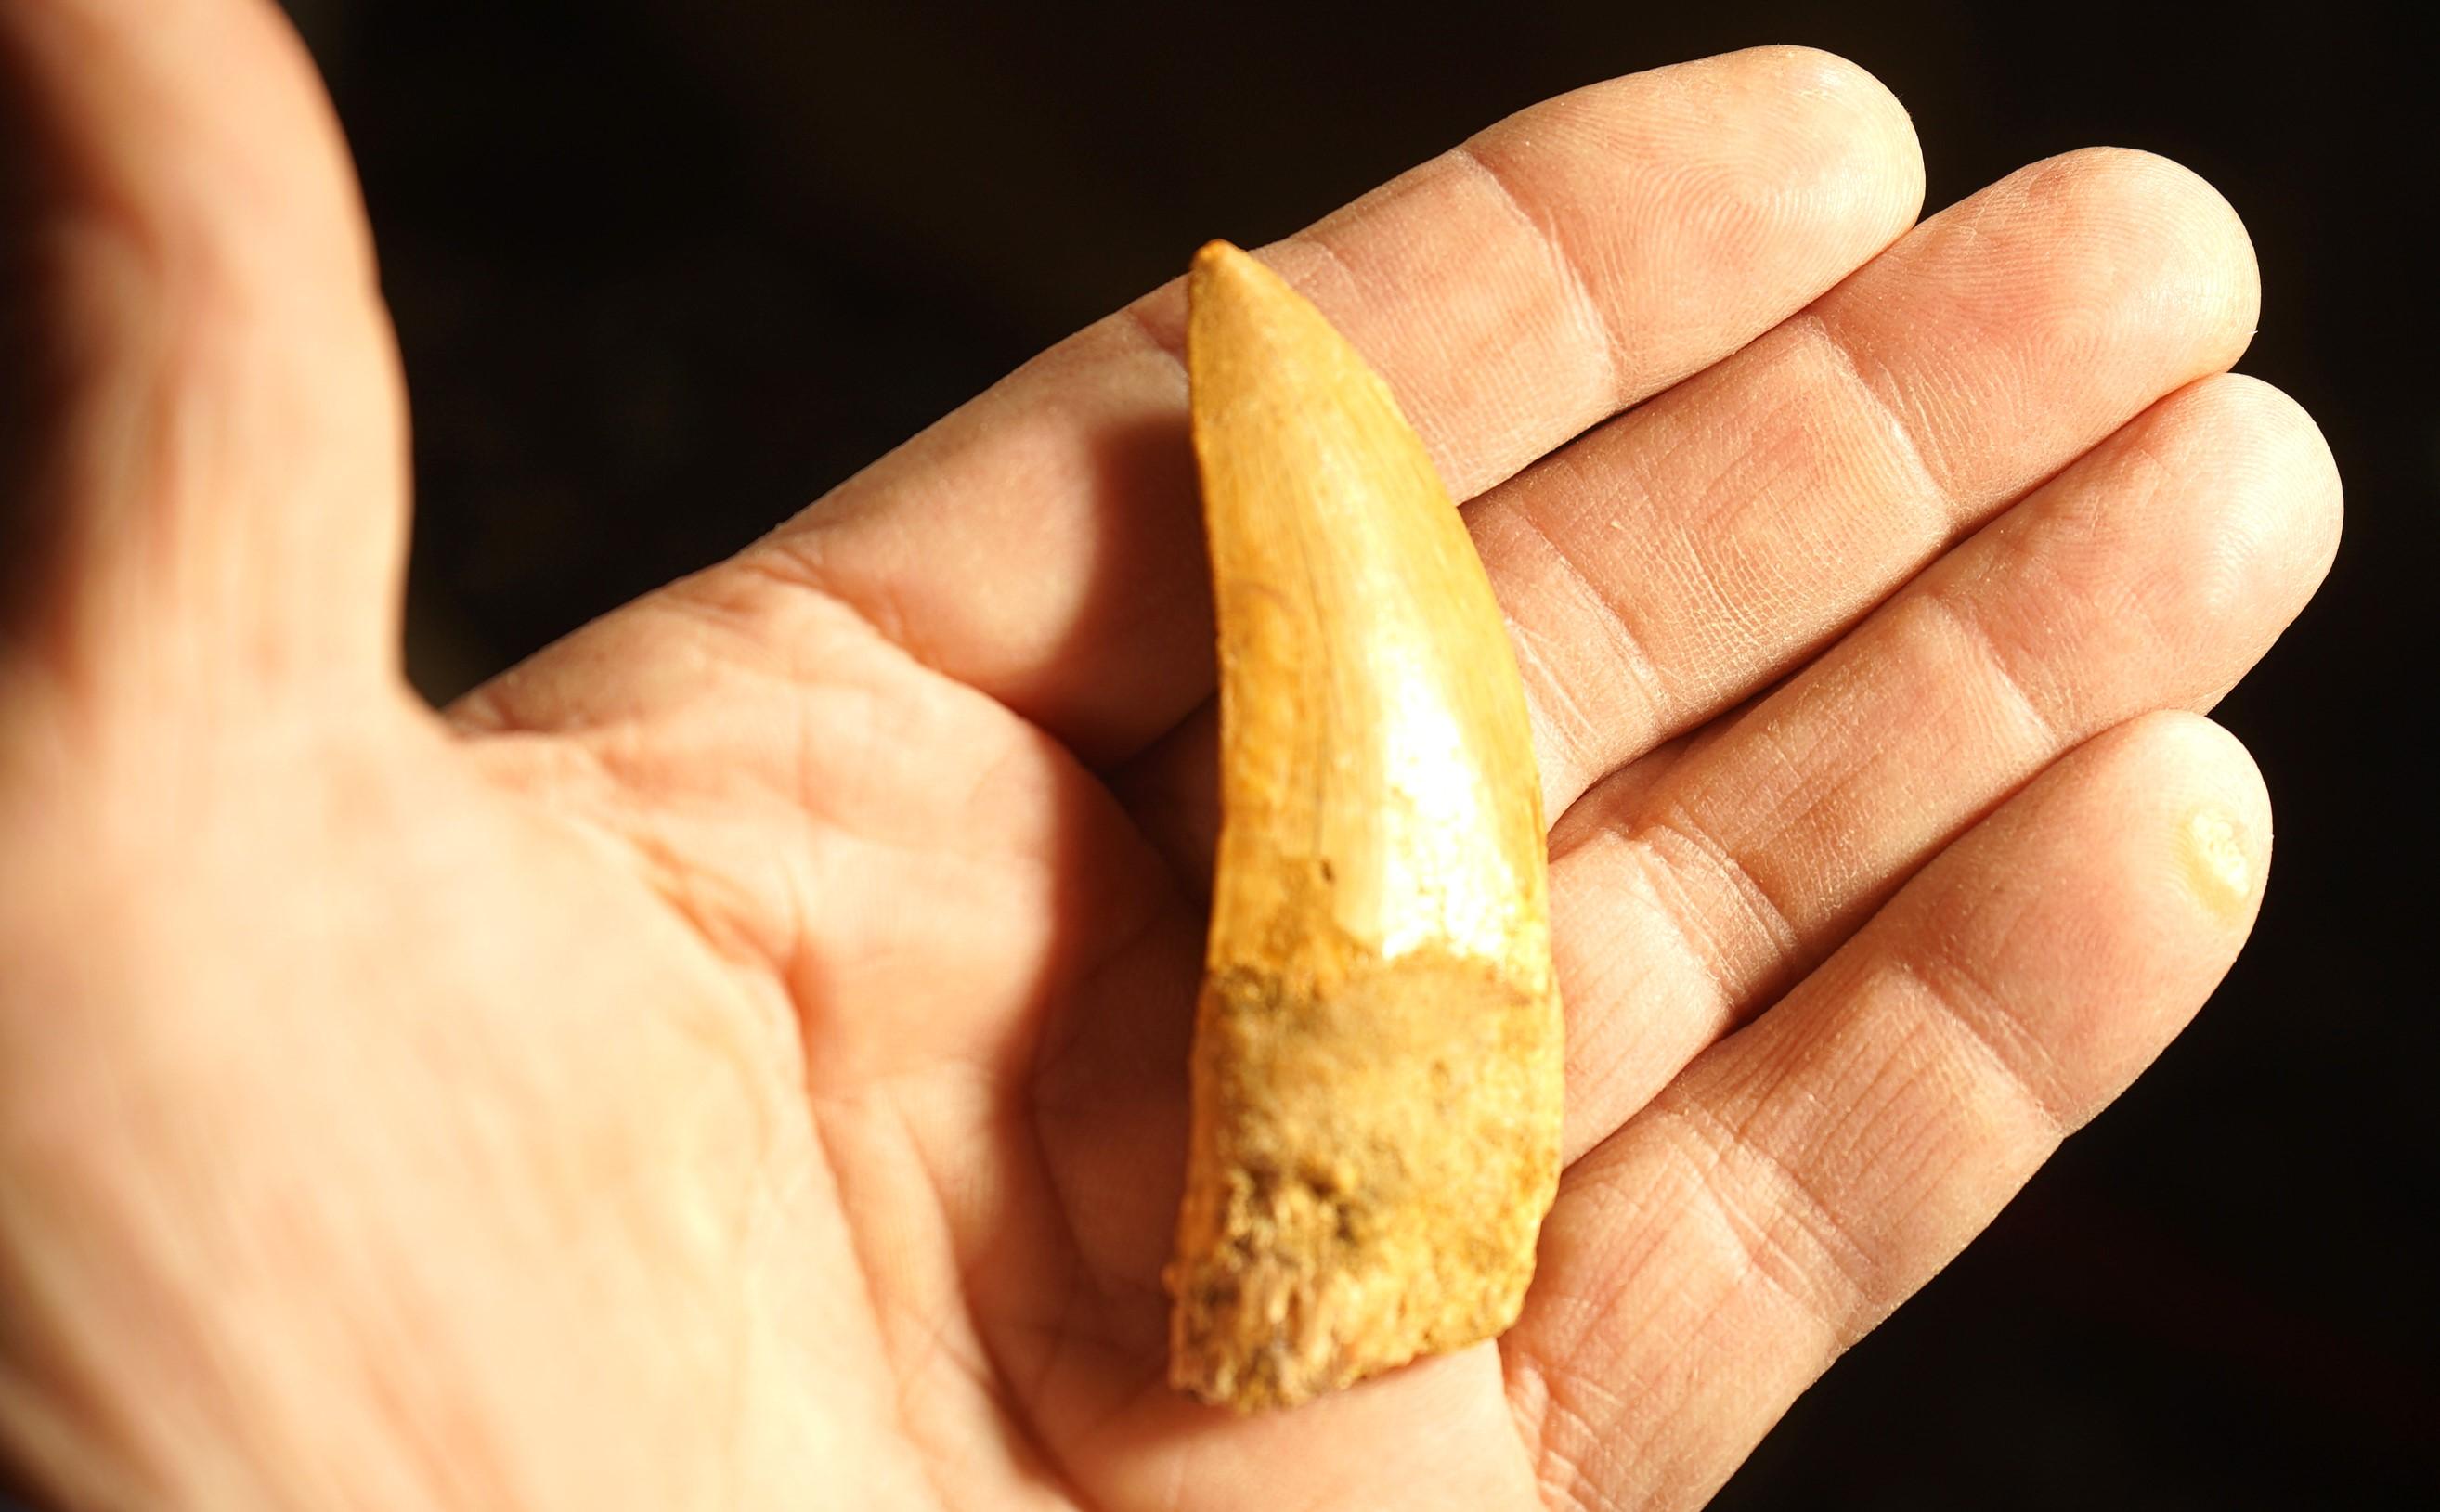 Authentic African T-Rex Fossil Tooth